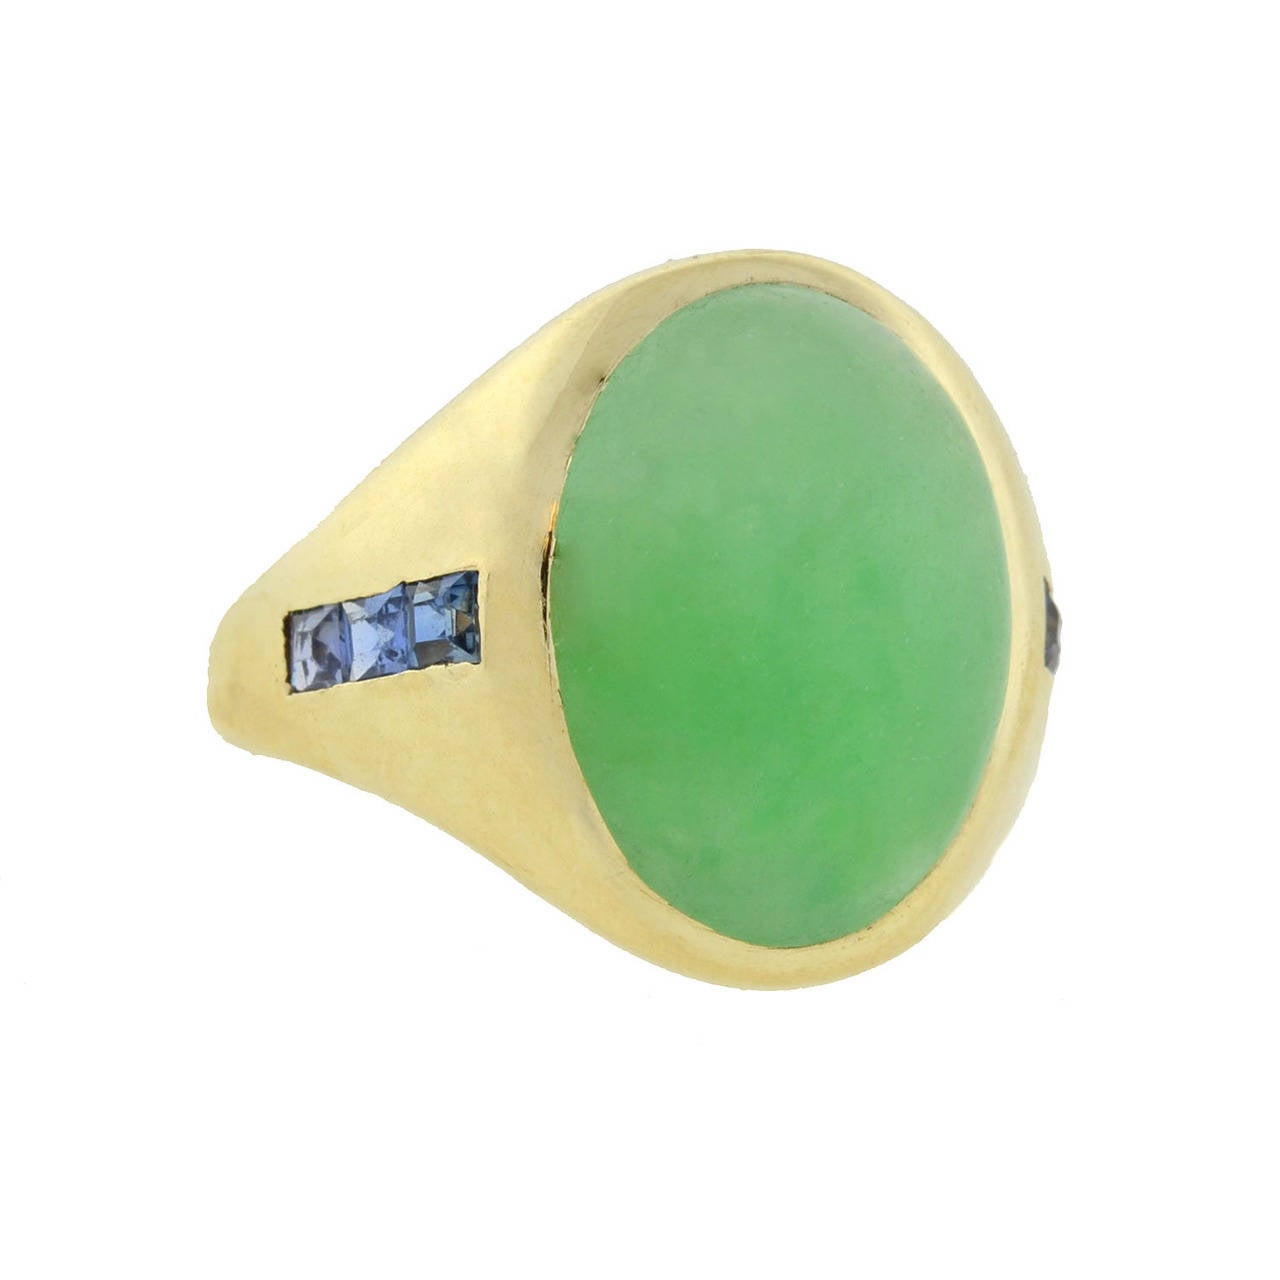 Bailey Banks & Biddle Jade Sapphire Gold Ring